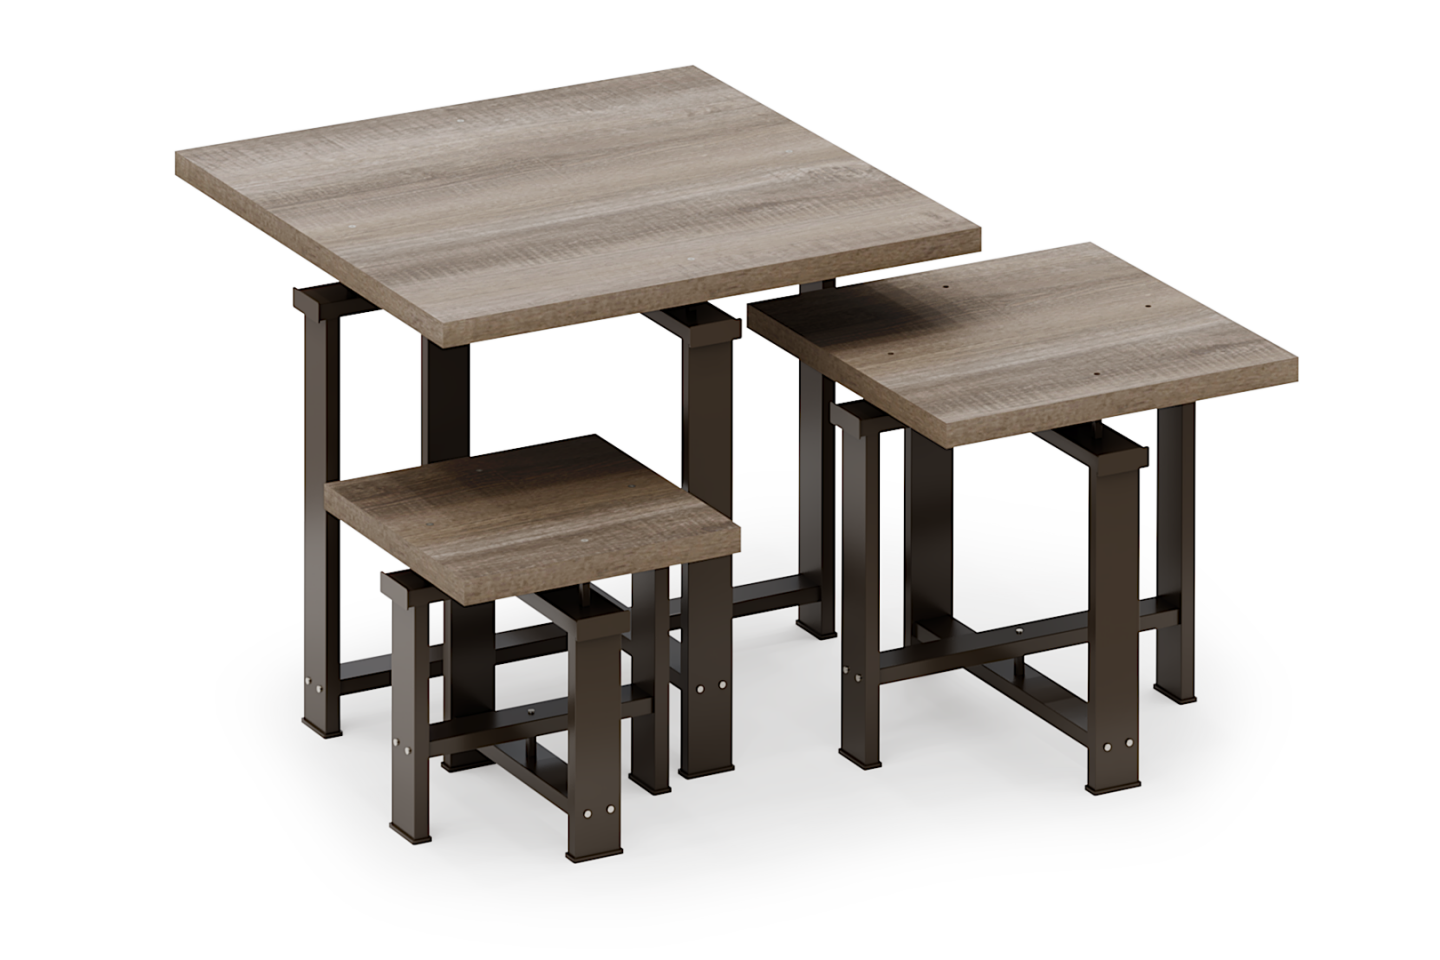 Edge Collection Square Table Set with Laminated Tops